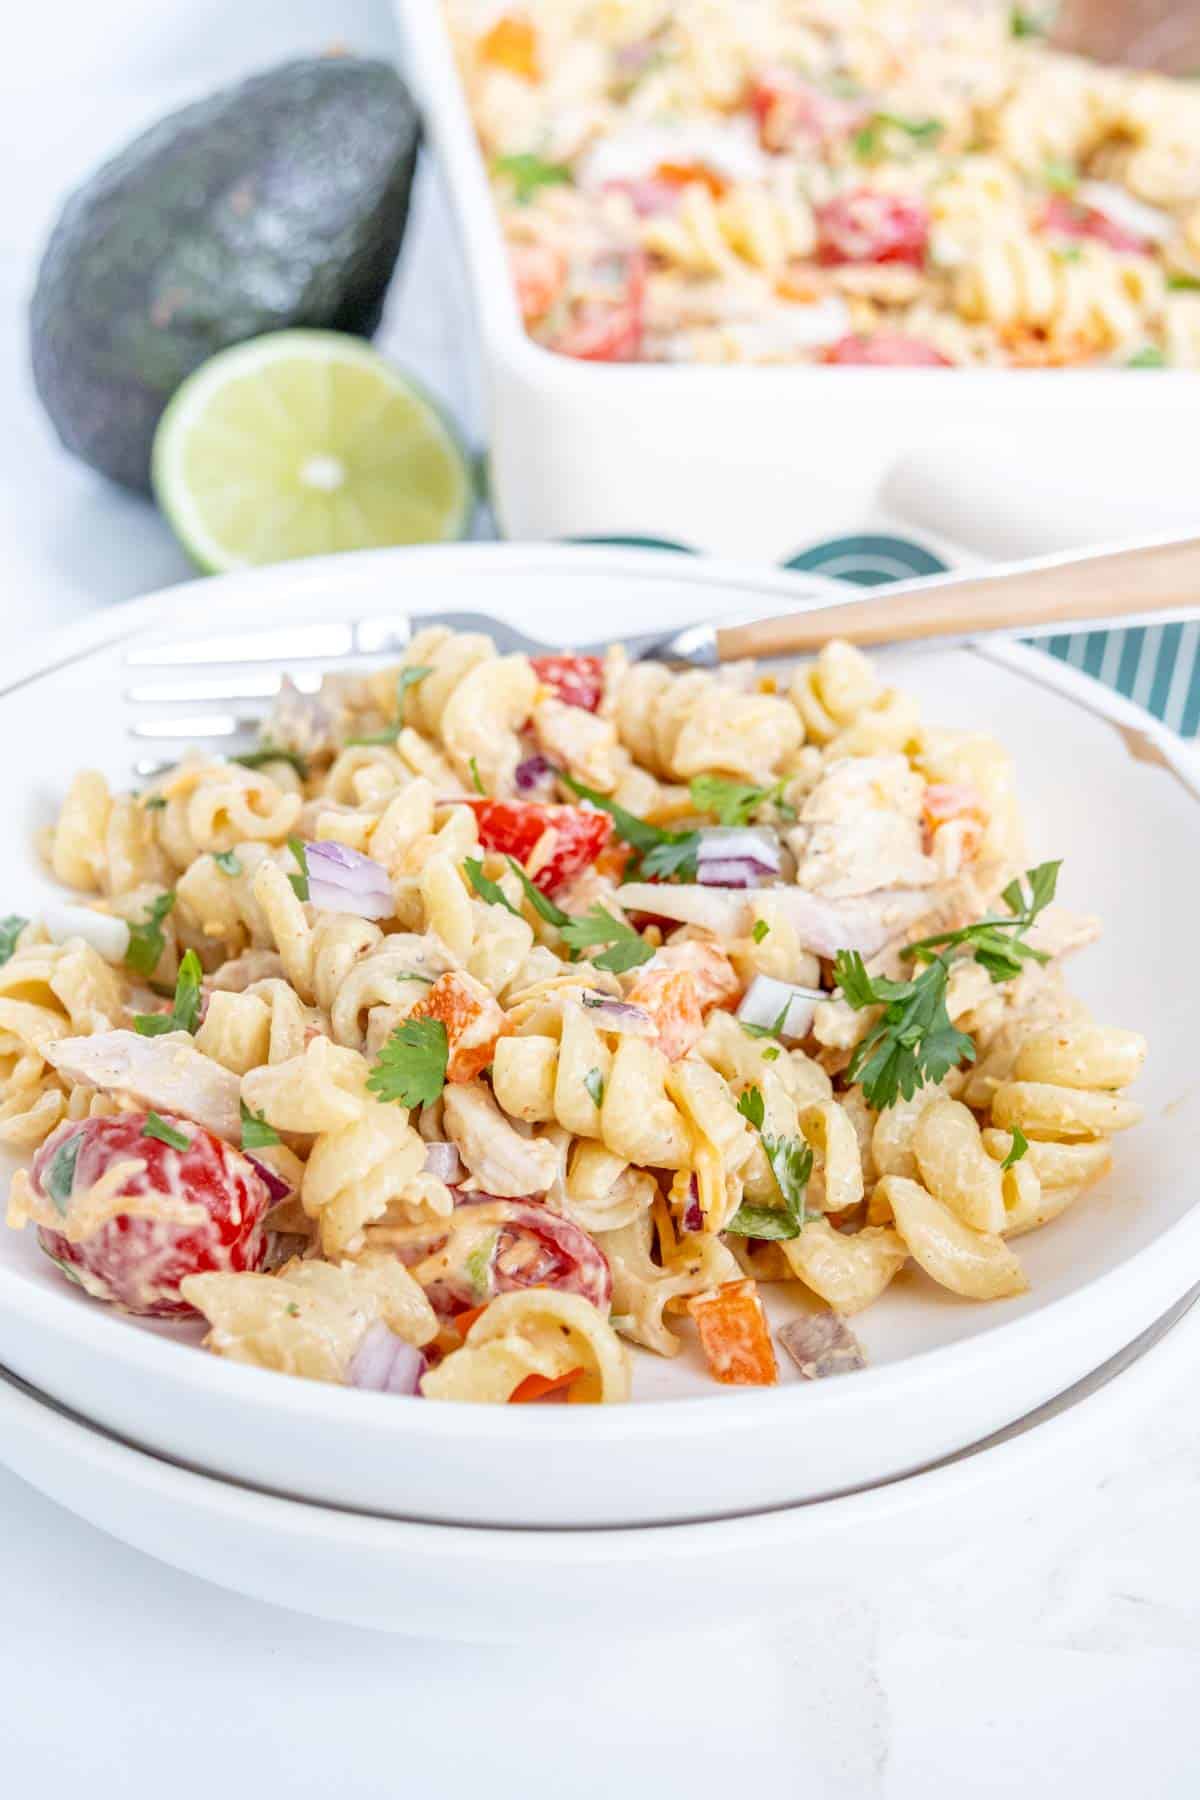 A bowl of creamy pasta salad with rotini, cherry tomatoes, red onions, bell peppers, and cilantro, garnished with a lime slice. An avocado and a baking dish of the pasta salad are in the background.